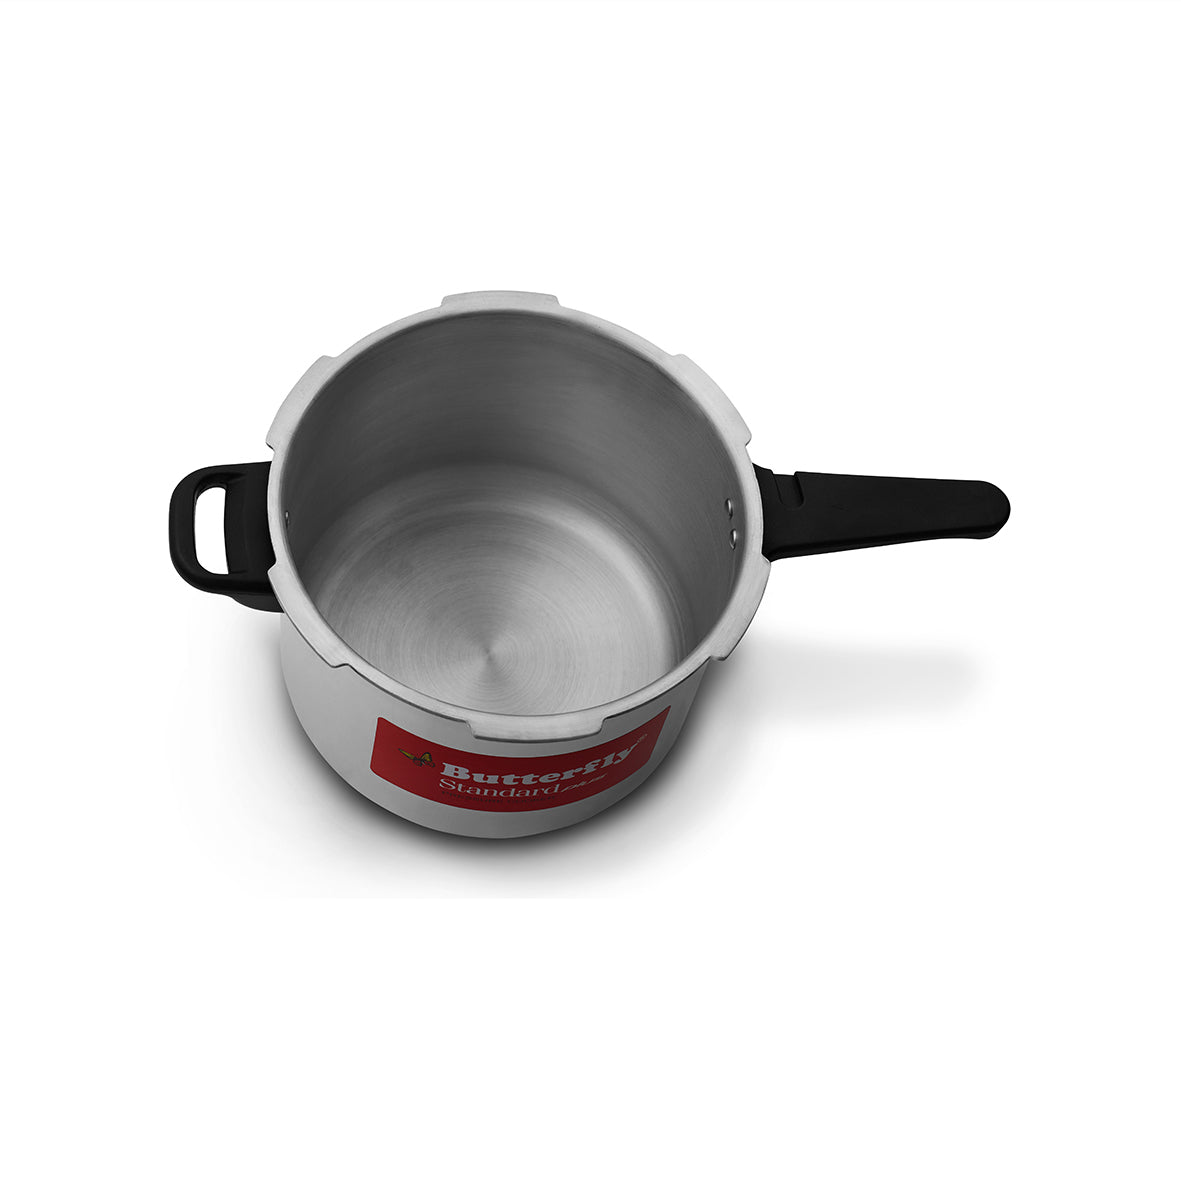 Butterfly Standard Plus Aluminium Induction Base Outer Lid Pressure Cooker, 10 Litres